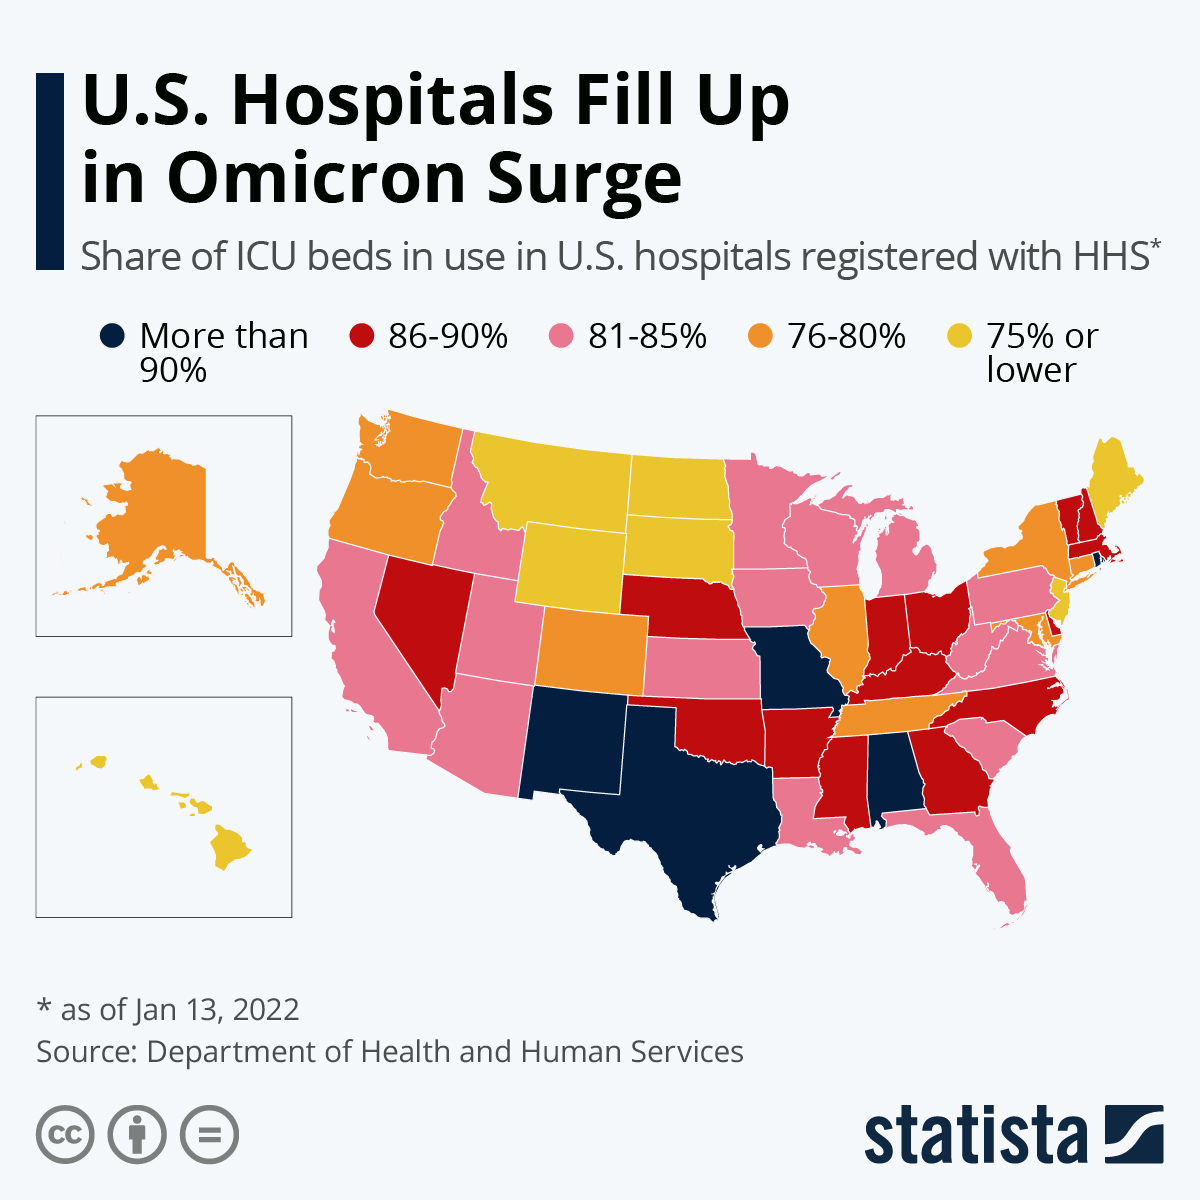 U.S. Hospitals Fill Up in Omicron Surge